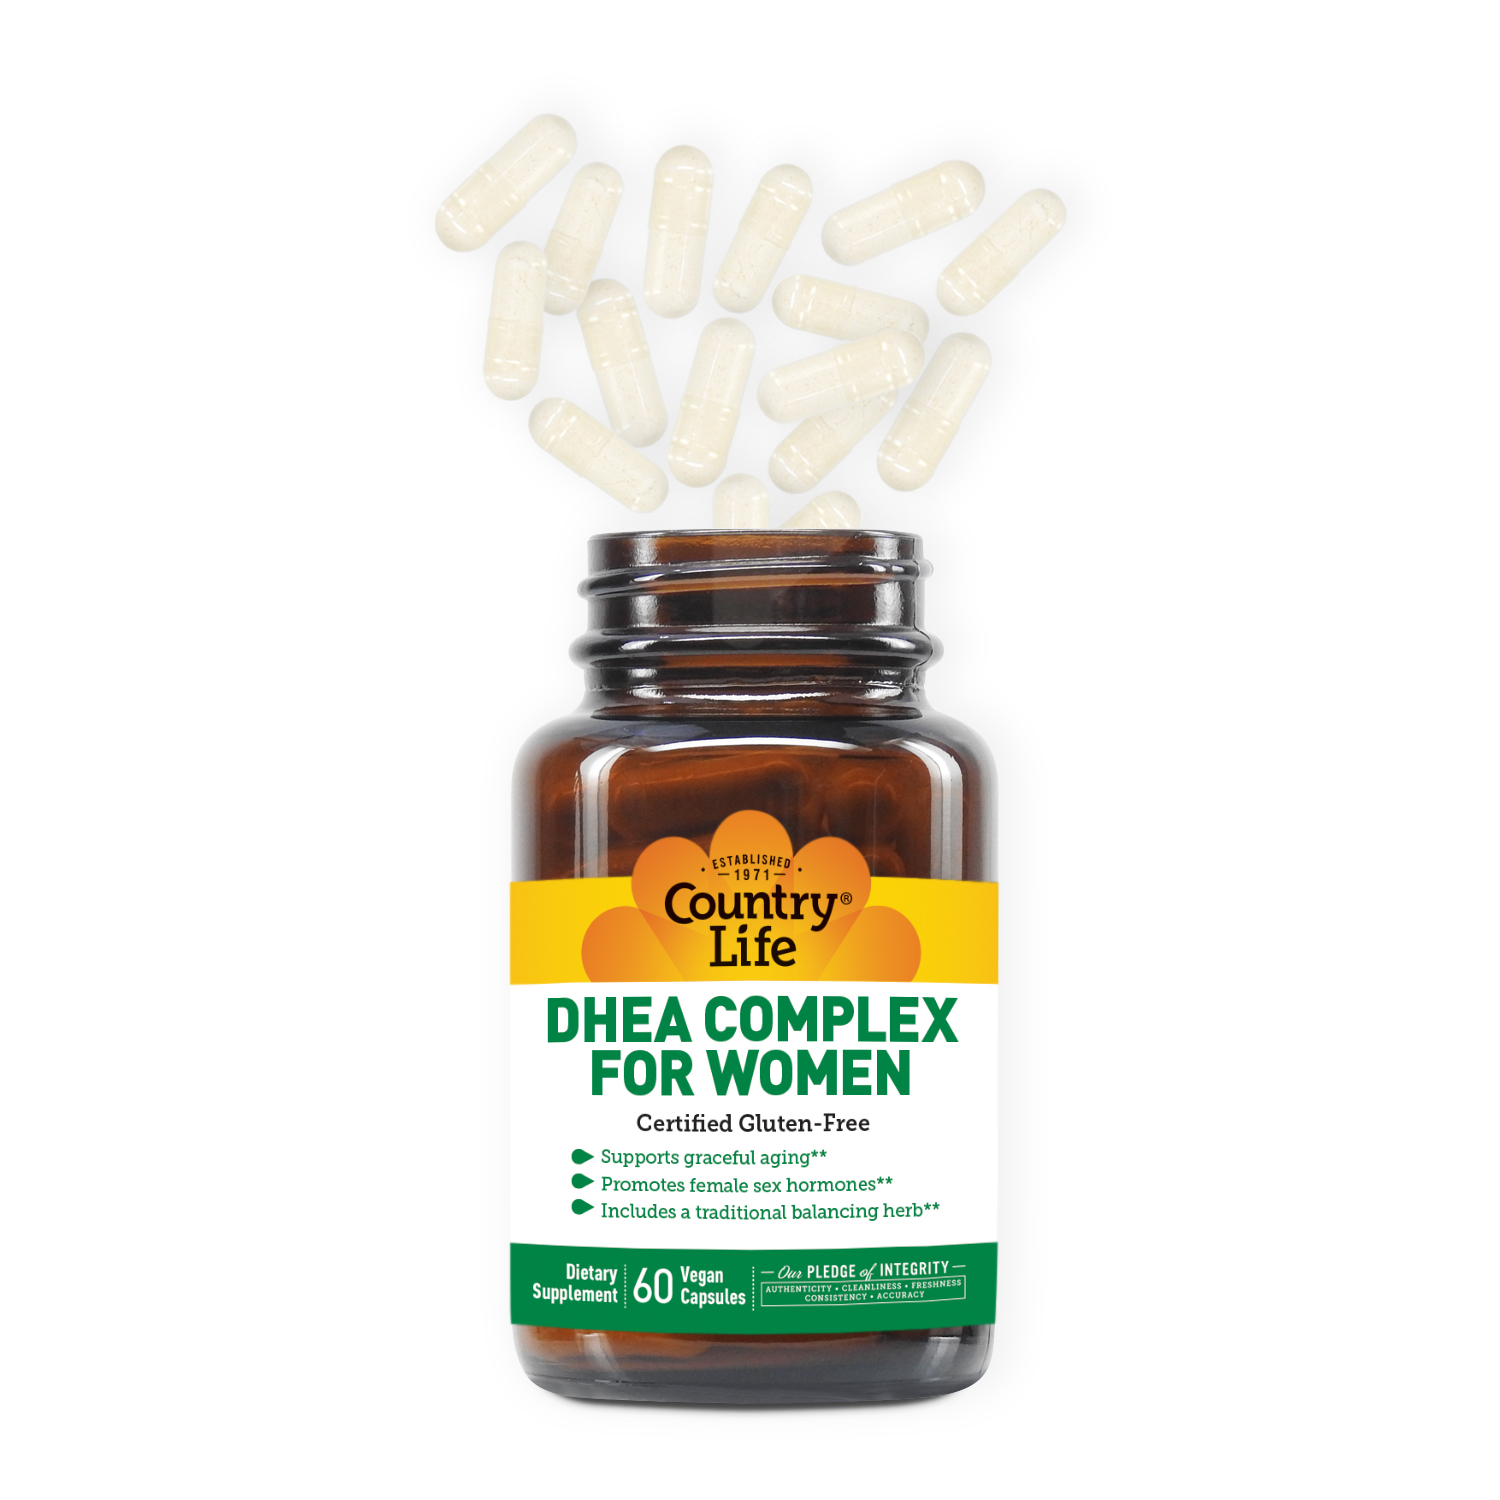 DHEA Complex For Women